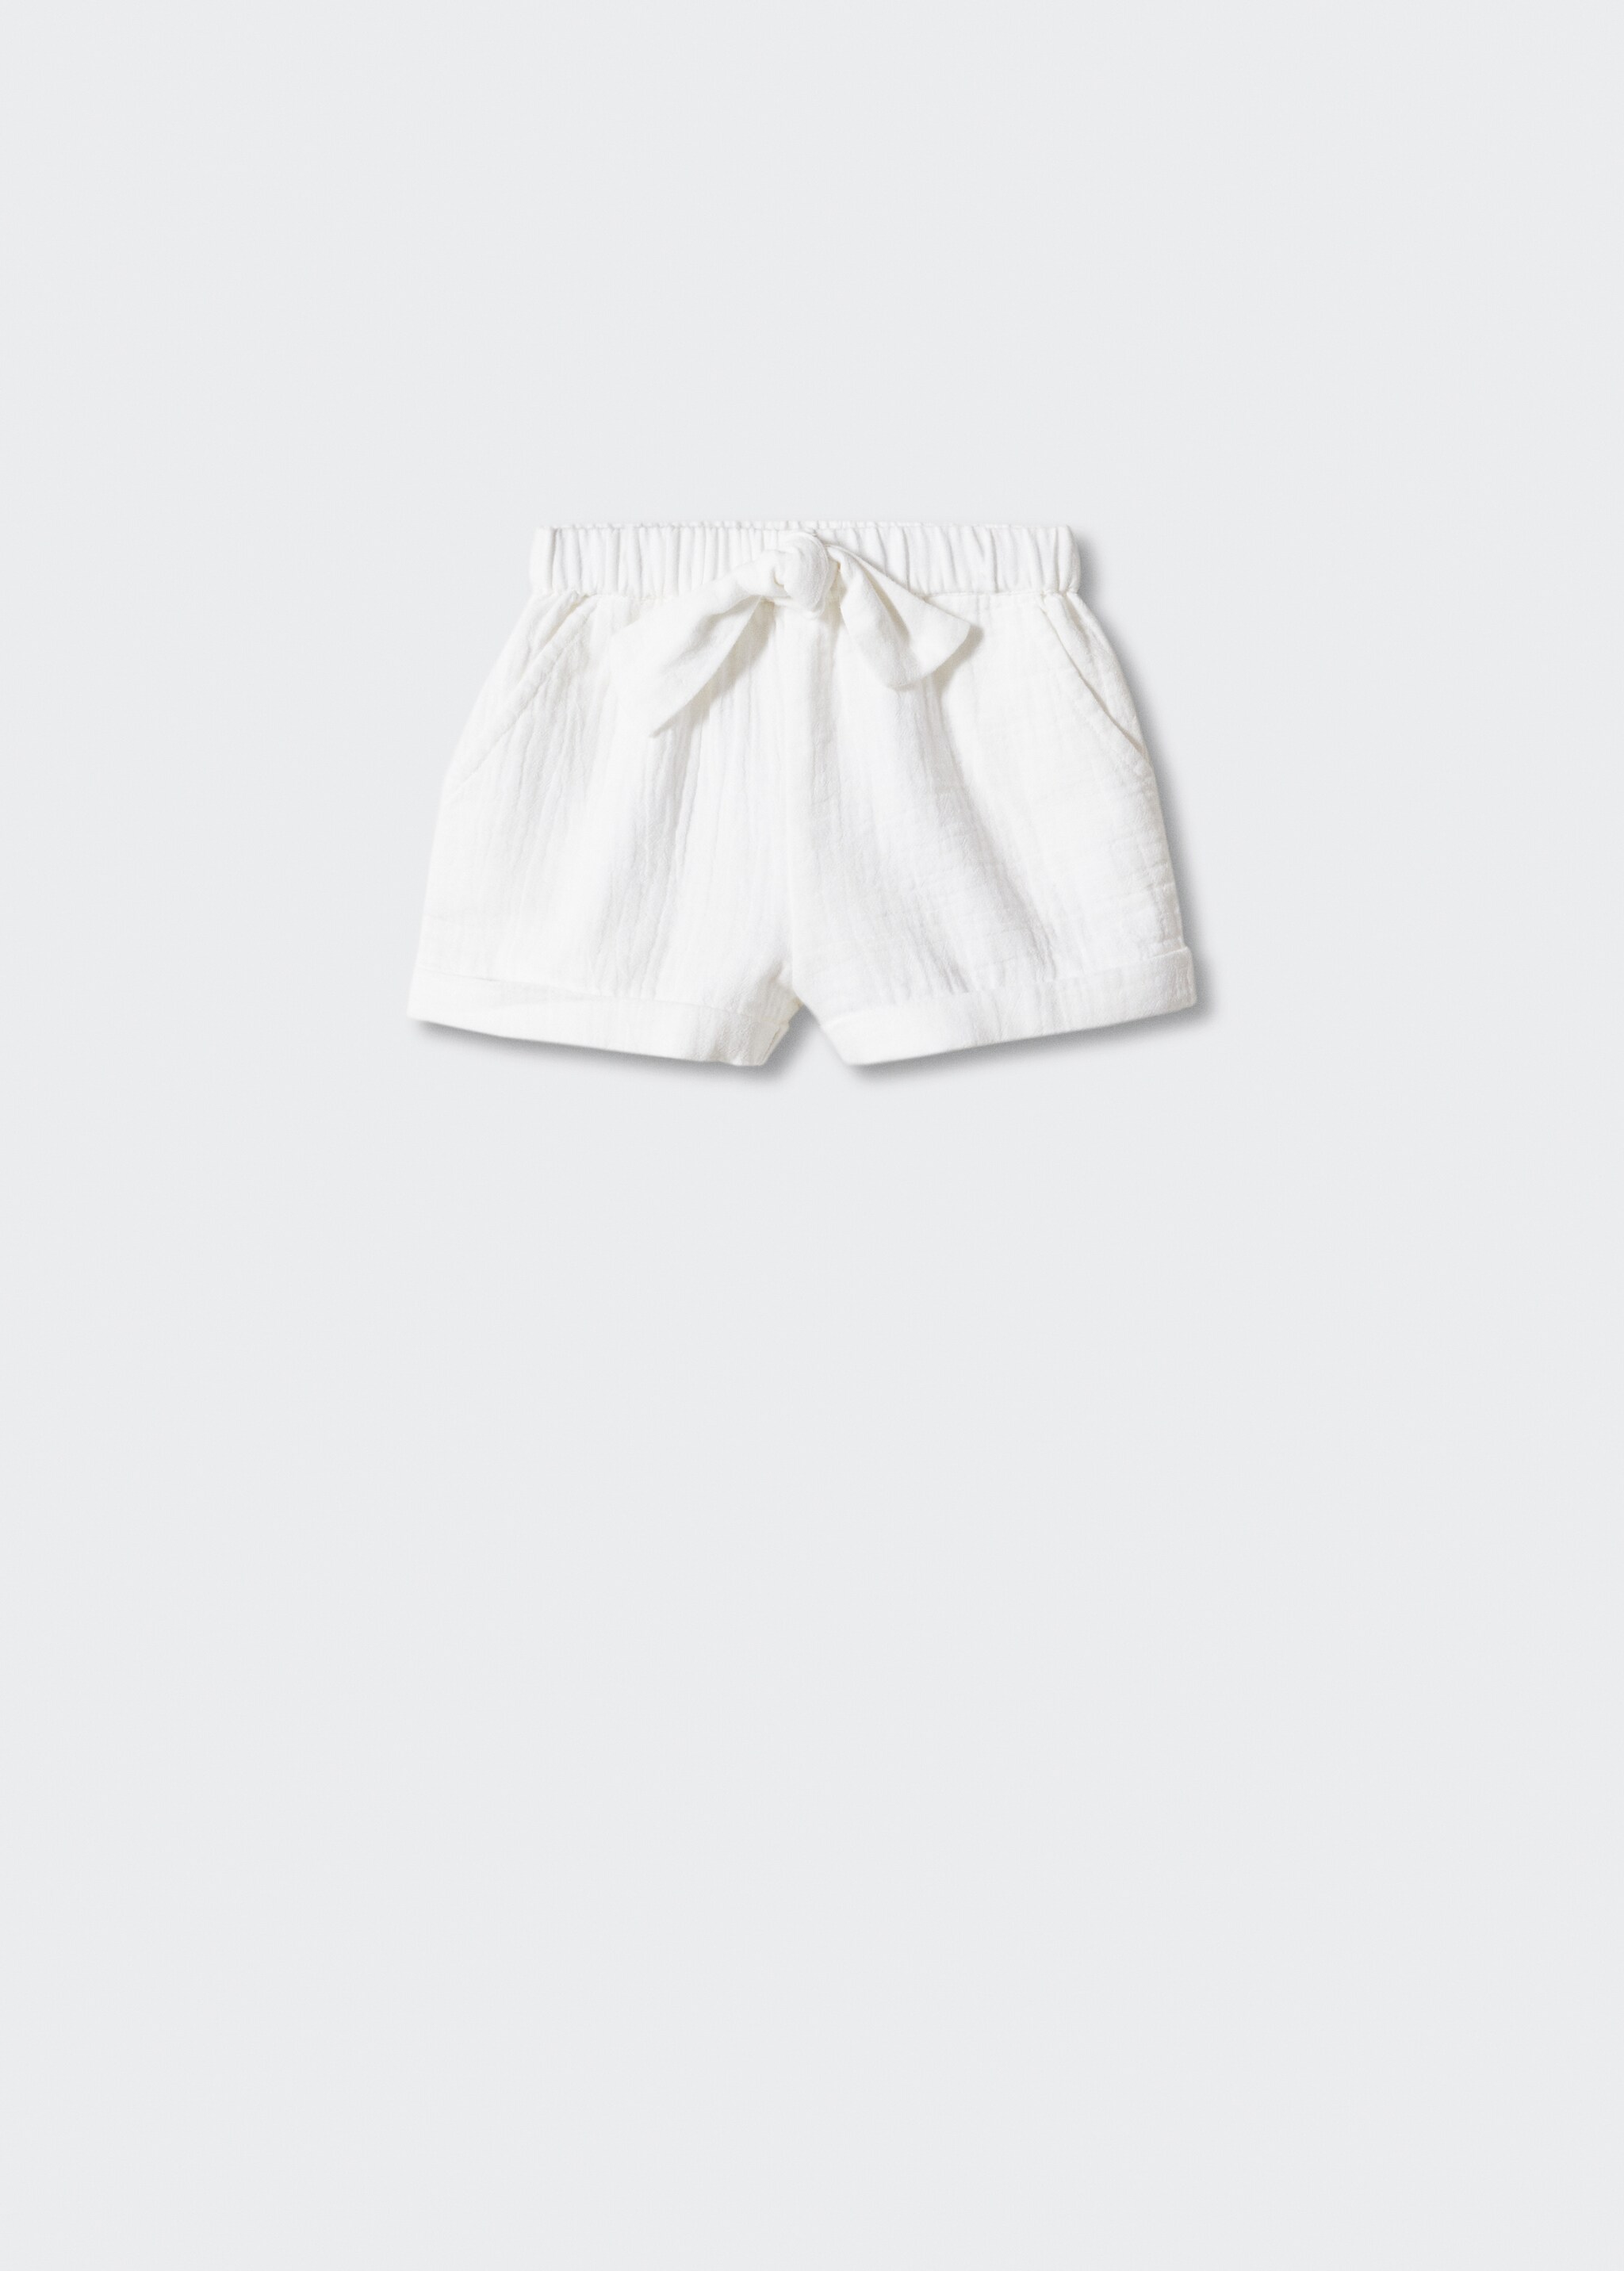 Stretch cotton shorts - Article without model